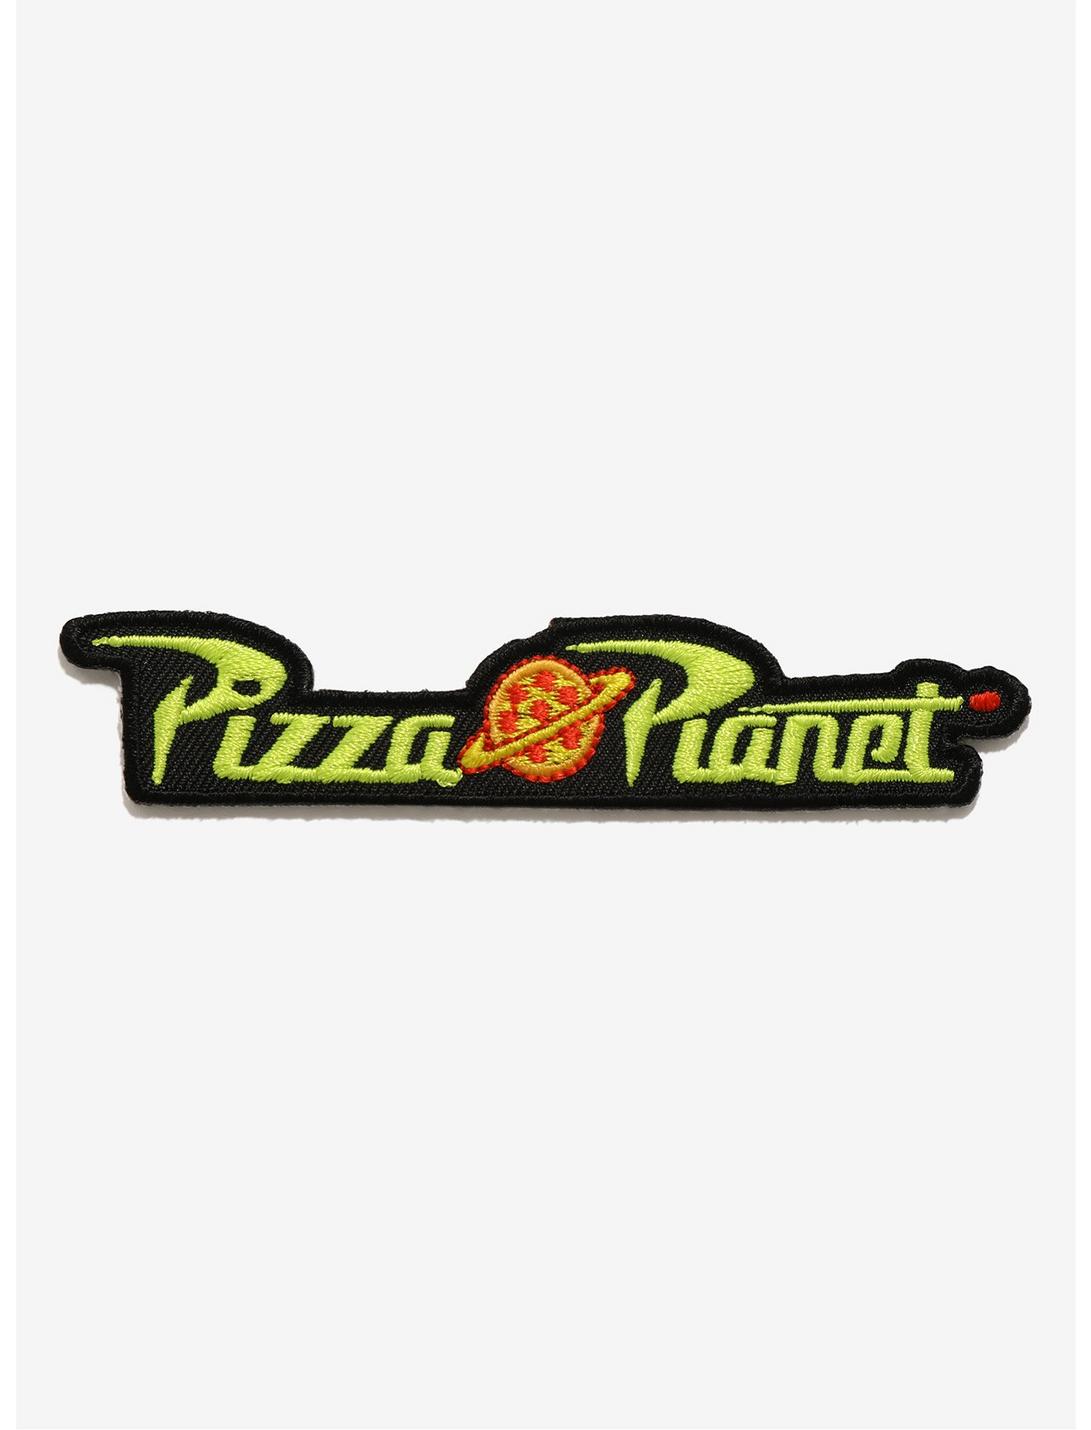 Disney Pixar Toy Story Pizza Planet Iron-On Patch - BoxLunch Exclusive, , hi-res